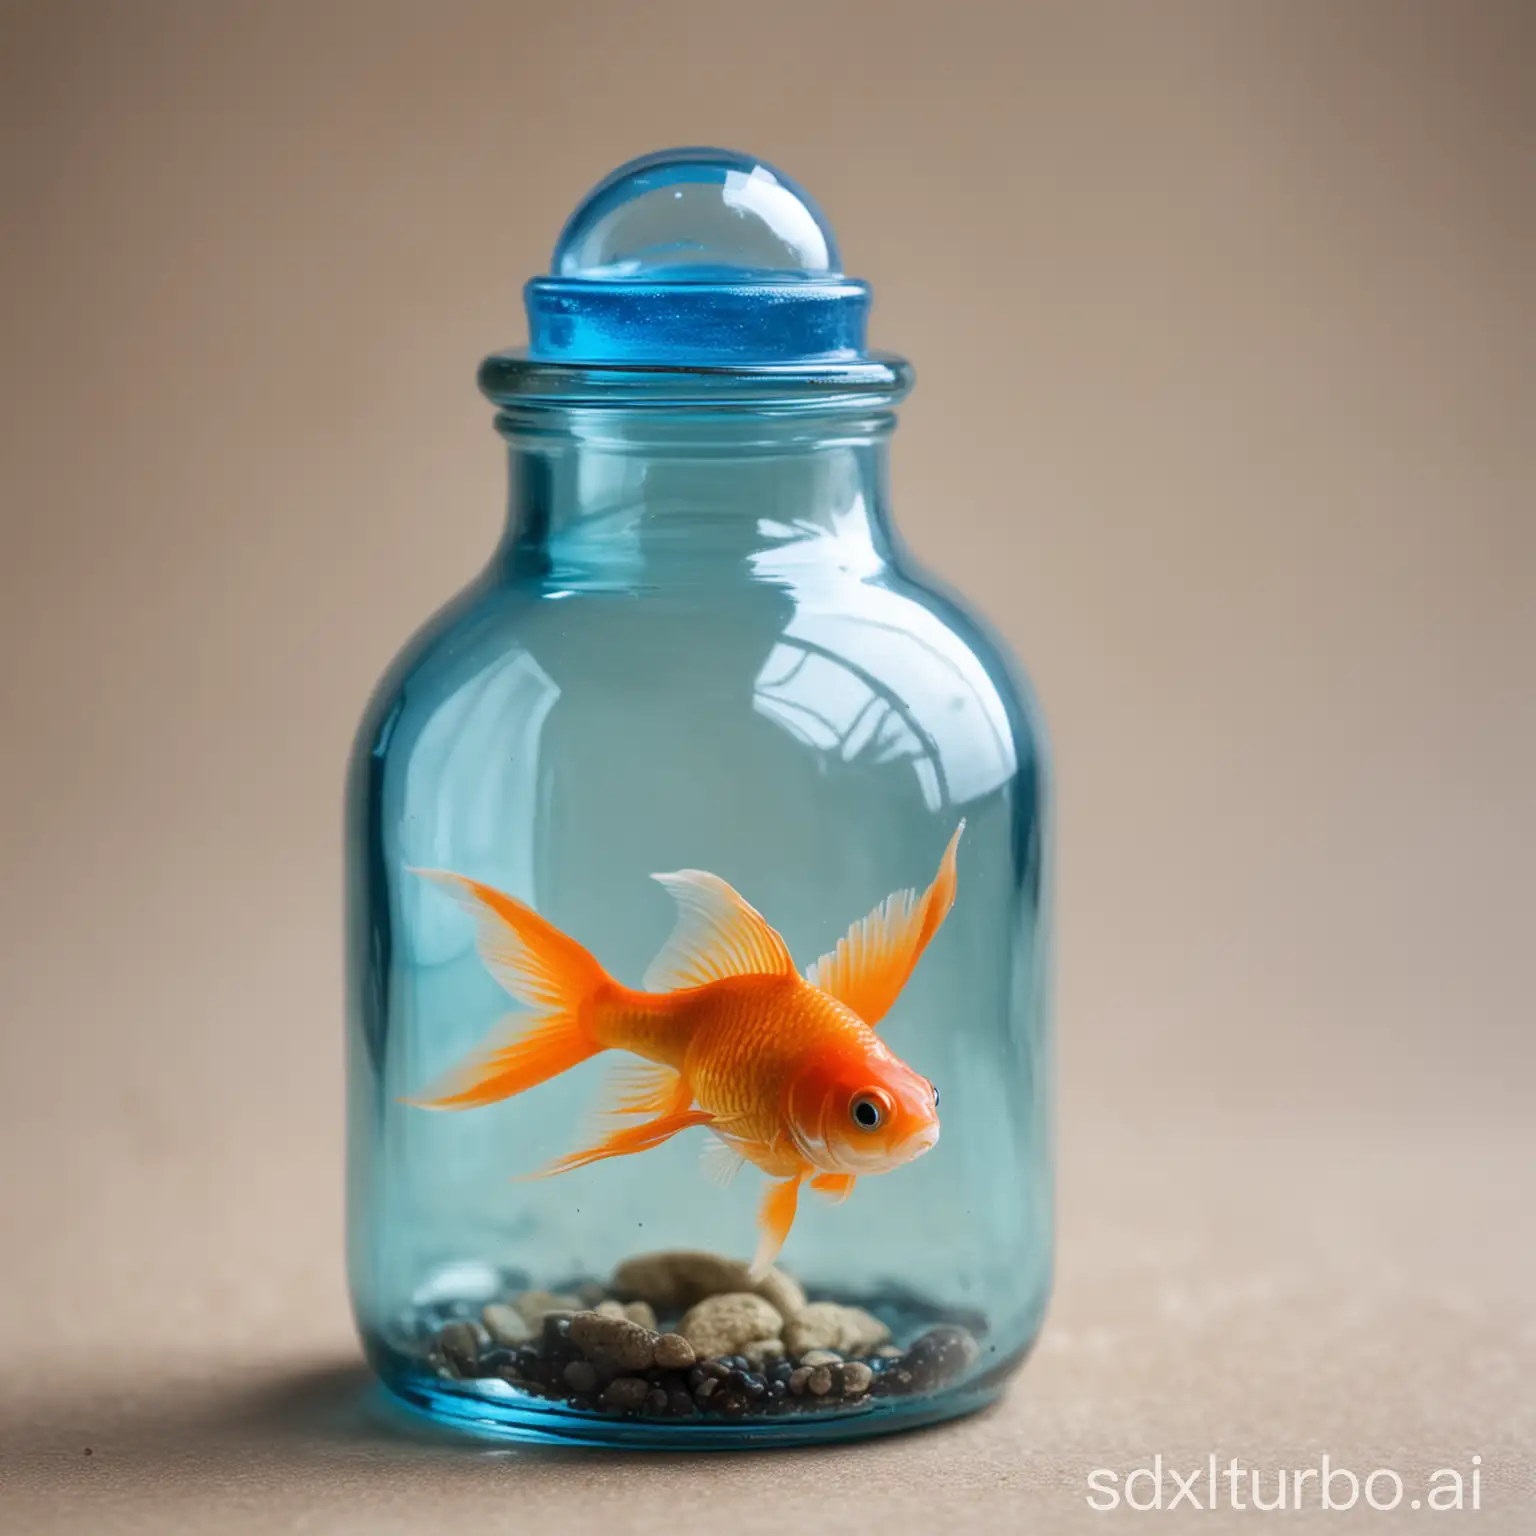 The little goldfish in the blue glass bottle.